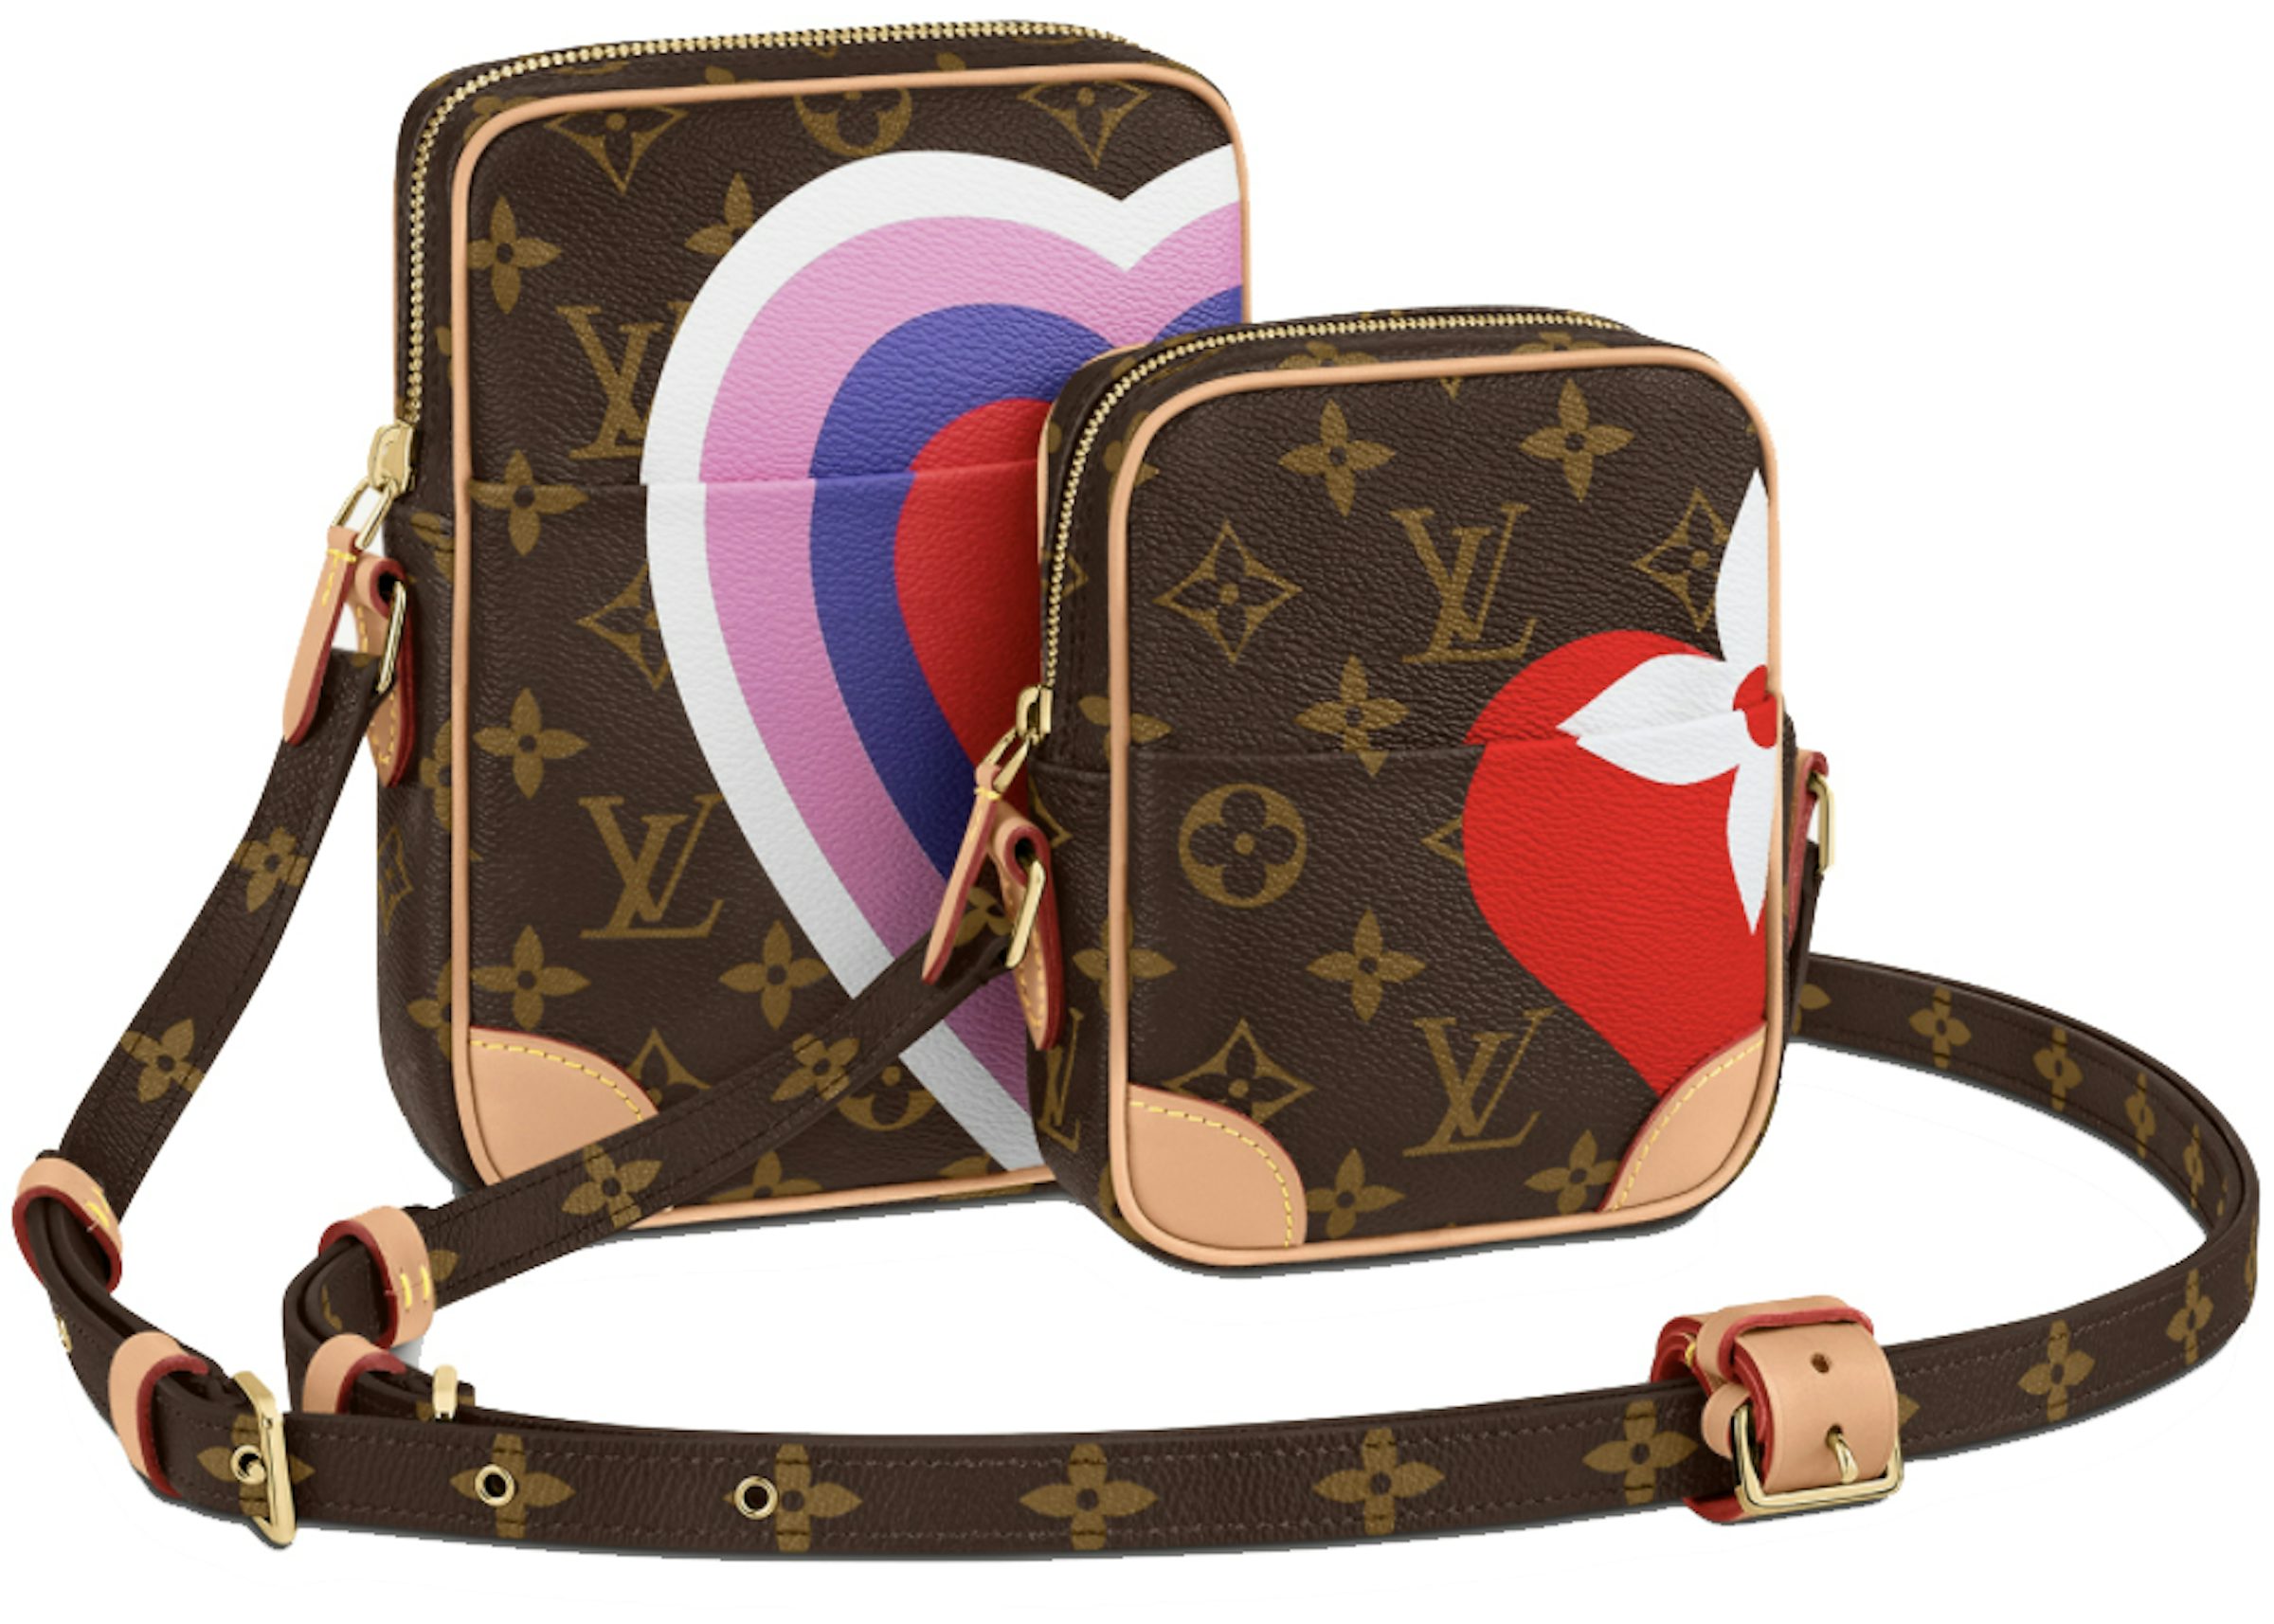 Louis Vuitton Paname Set Game On Monogram in Coated Canvas with